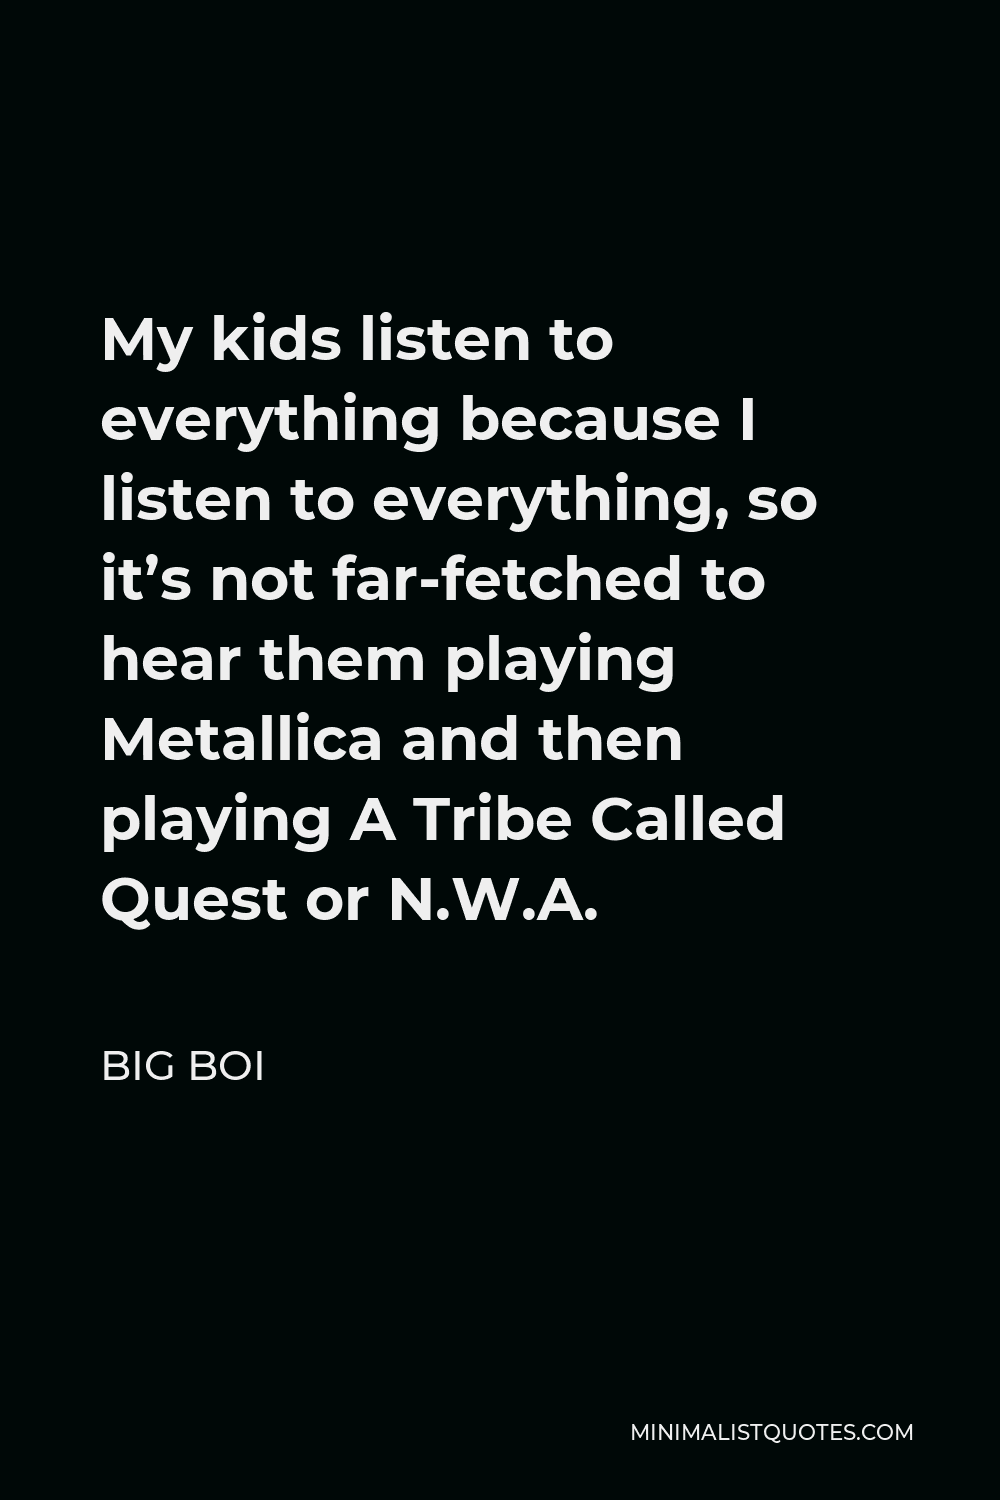 Big Boi Quote - My kids listen to everything because I listen to everything, so it’s not far-fetched to hear them playing Metallica and then playing A Tribe Called Quest or N.W.A.